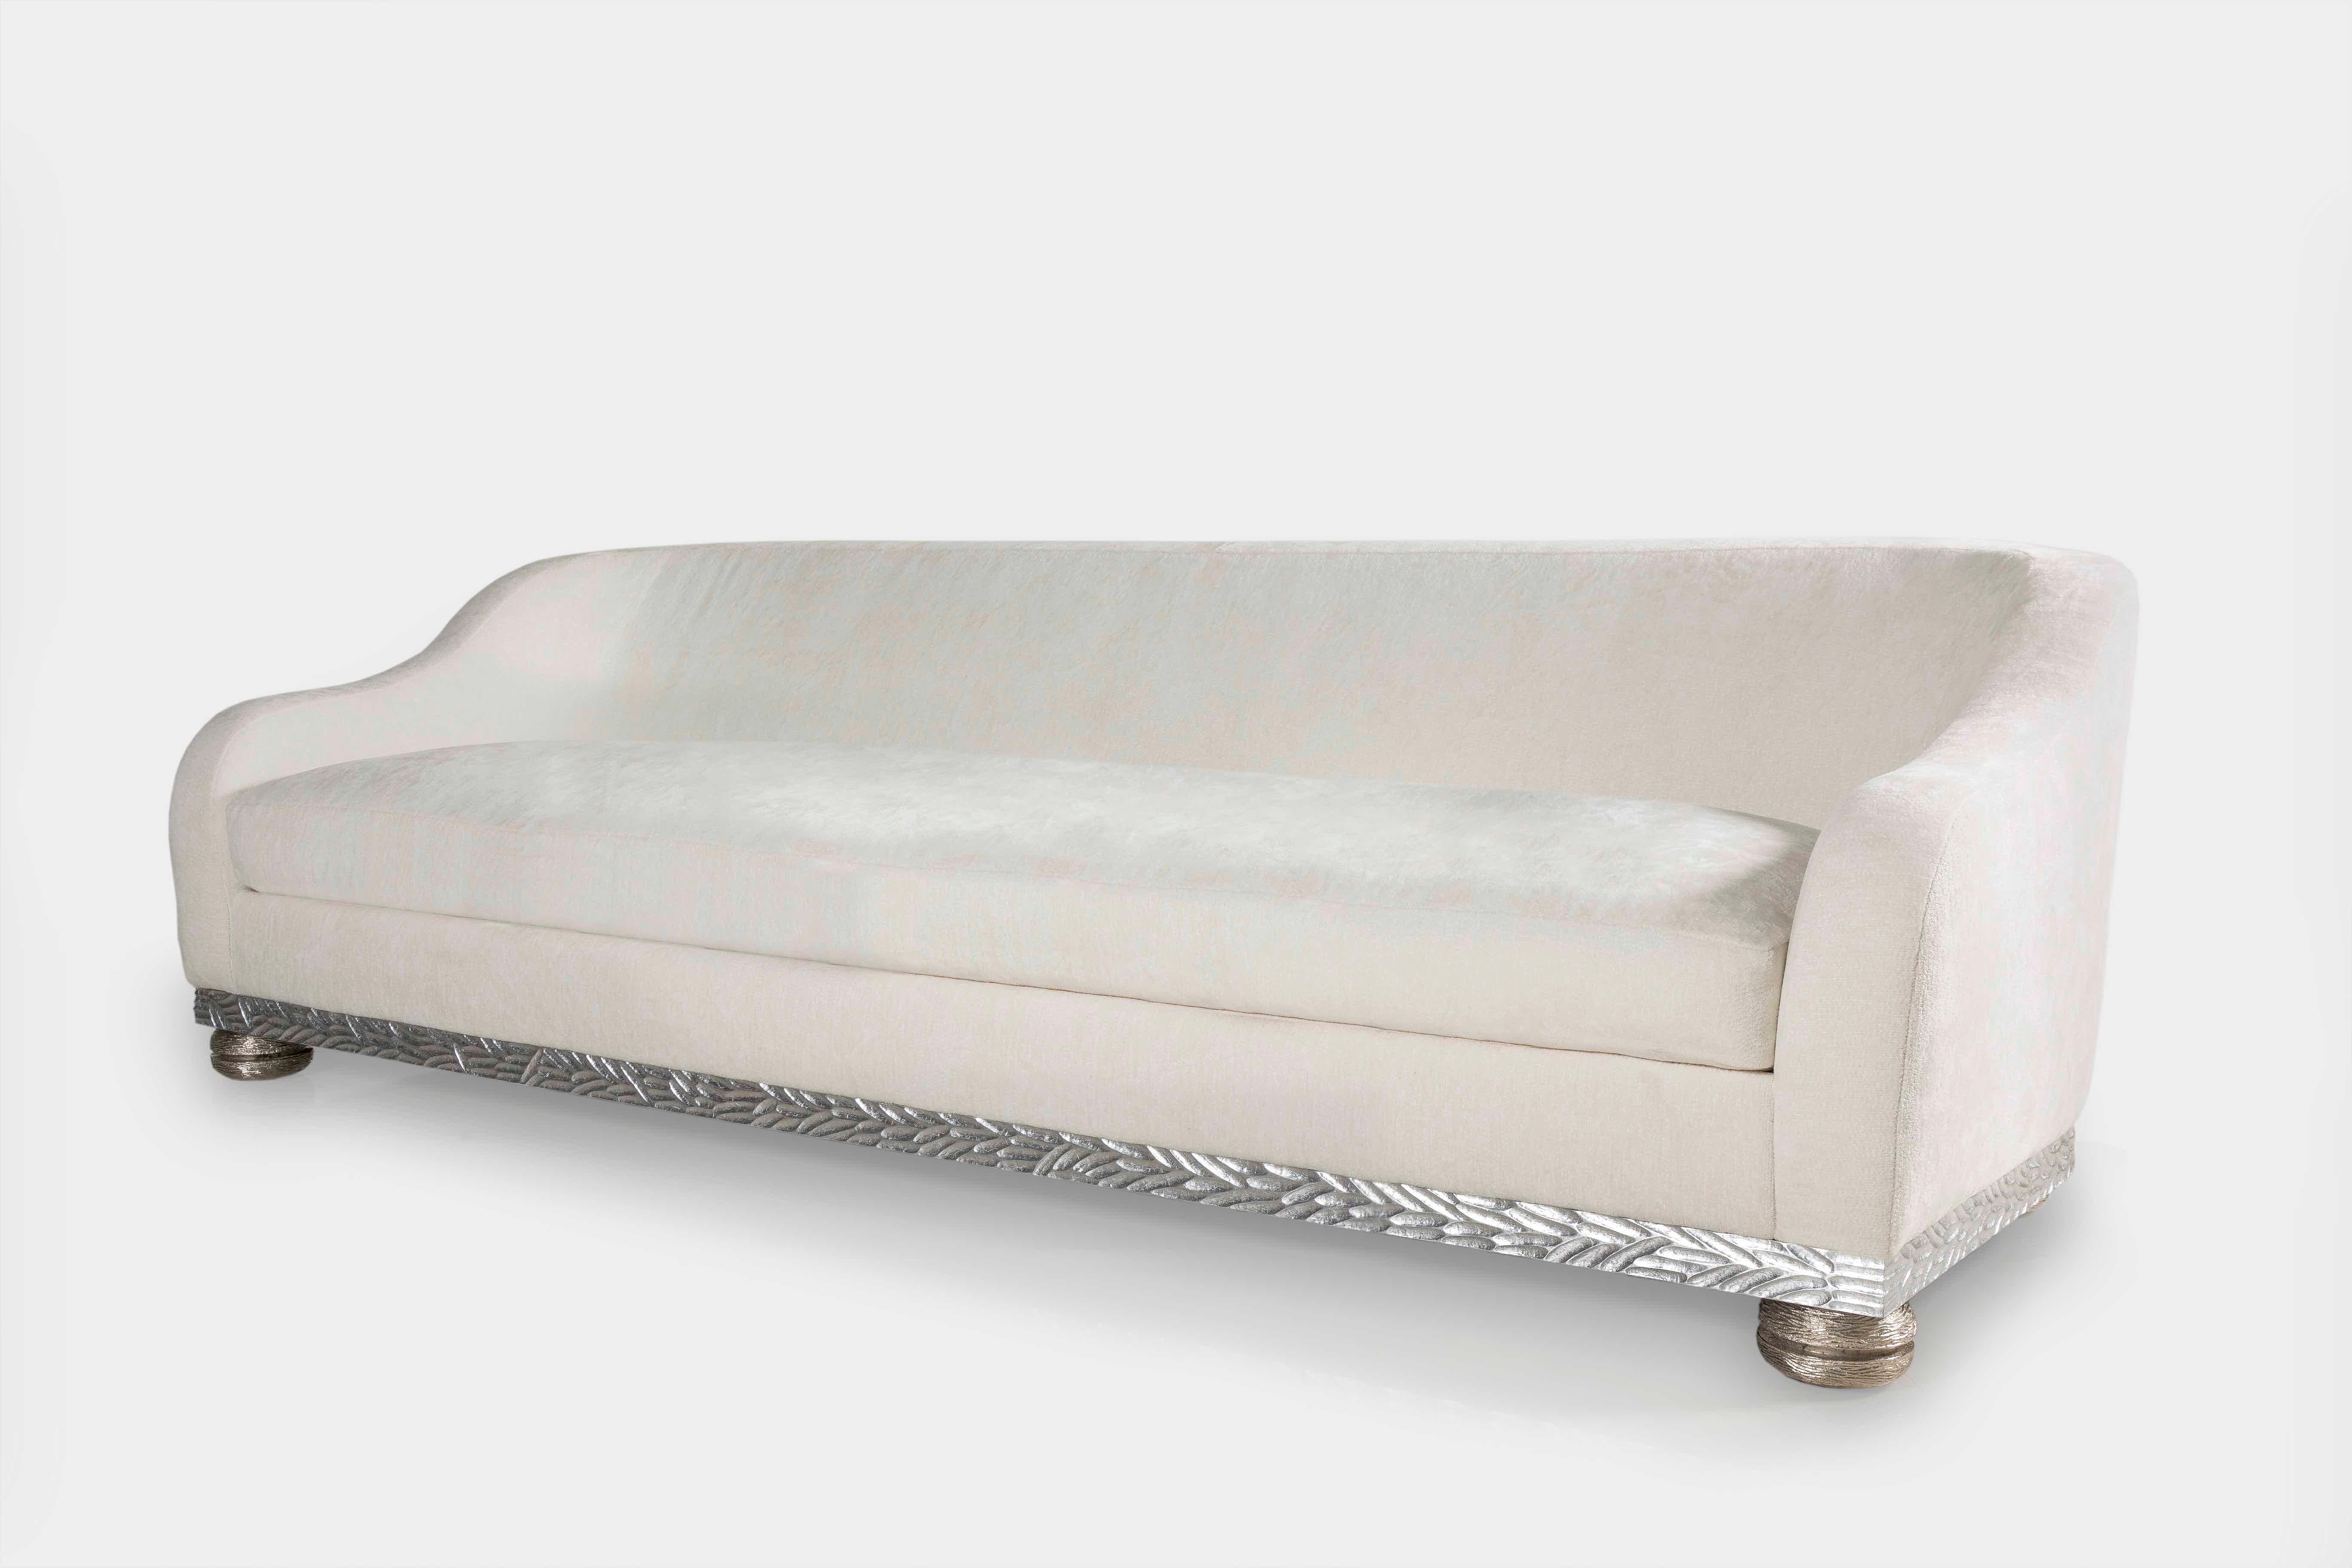 Kiota sofa by Francis Sultana (all prices exclude delivery).